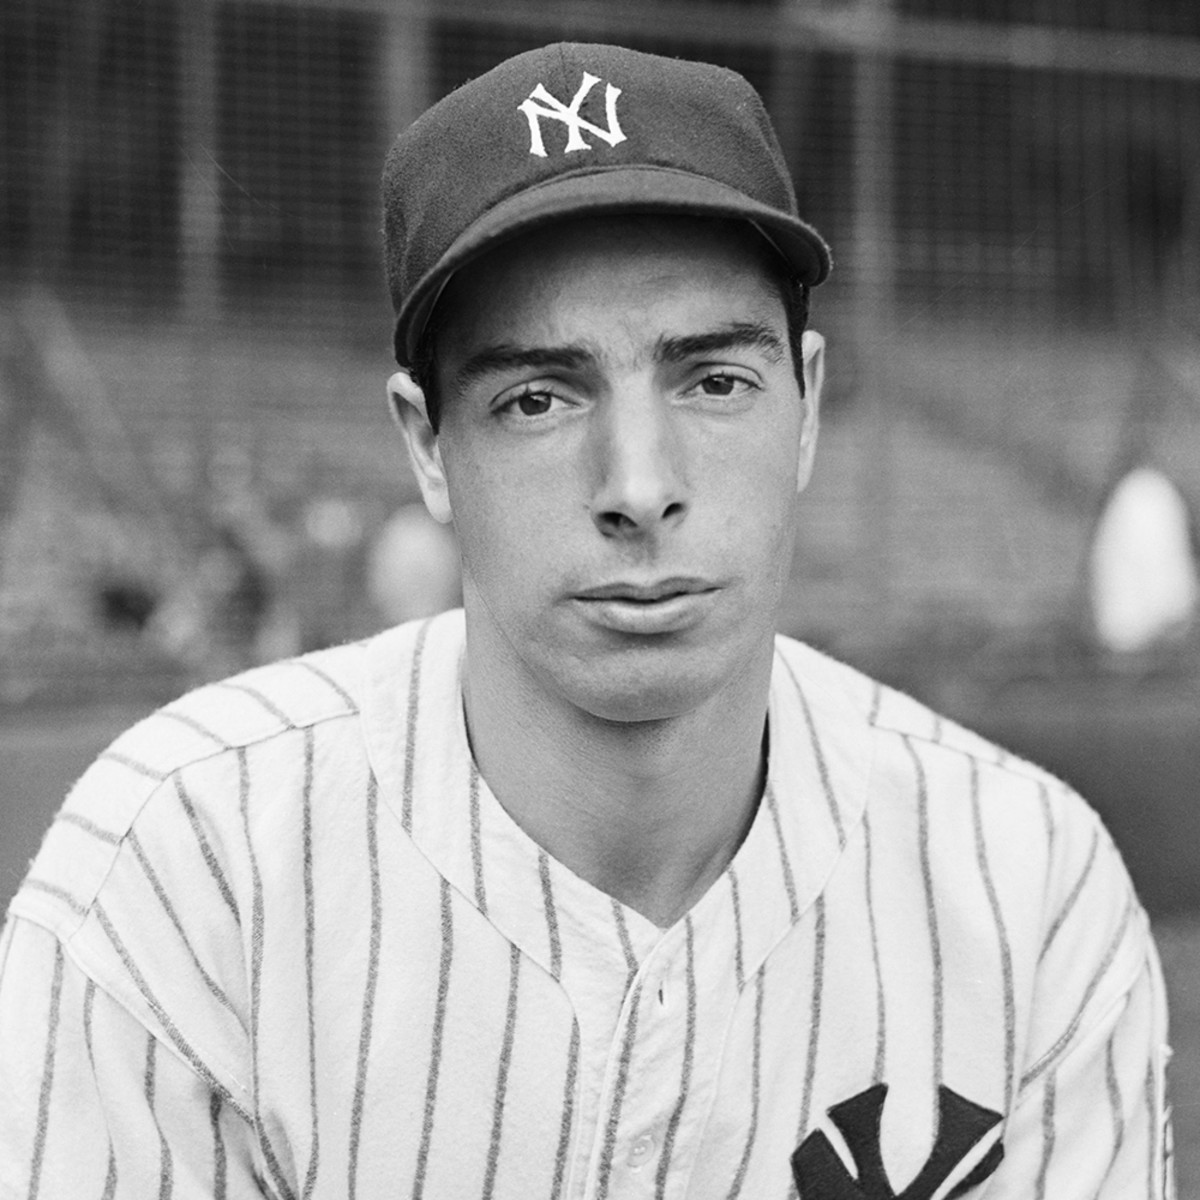 Joe DiMaggio Trading Cards: Values, Tracking & Hot Deals